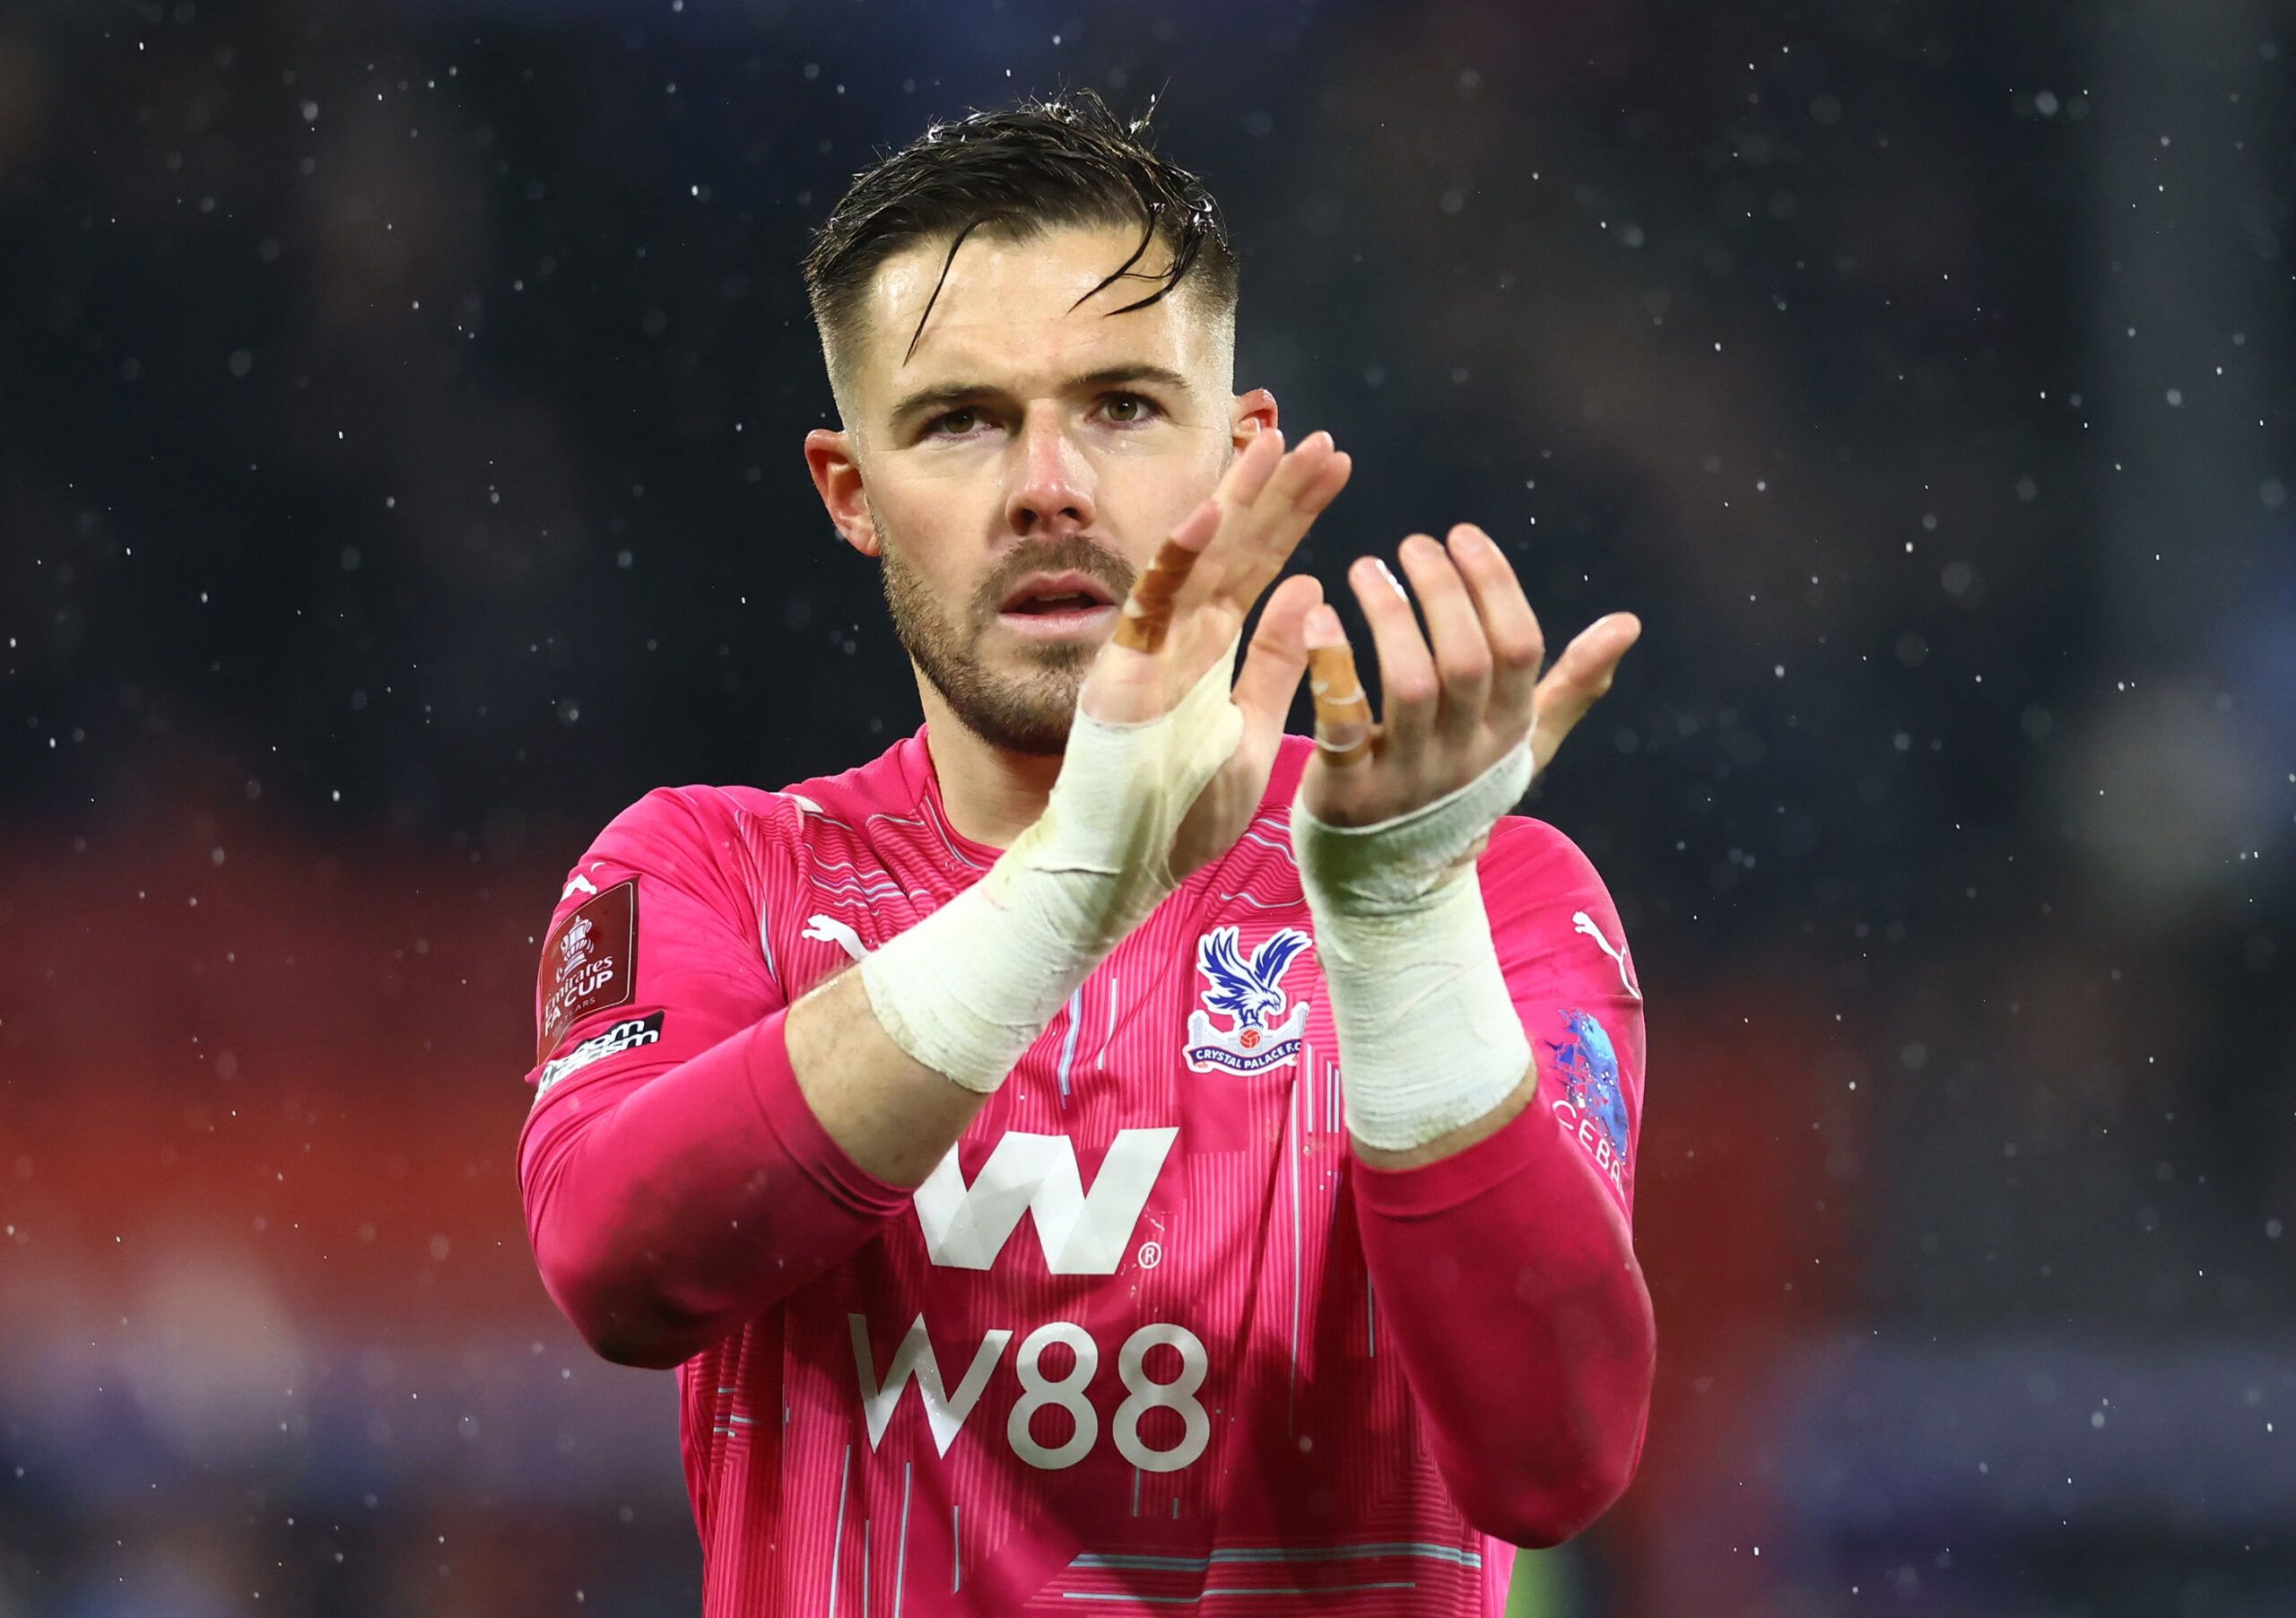 Soccer Football - FA Cup Fifth Round - Crystal Palace v Stoke City - Selhurst Park, London, Britain - March 1, 2022 Crystal Palace's Jack Butland applauds fans after the match REUTERS/David Klein